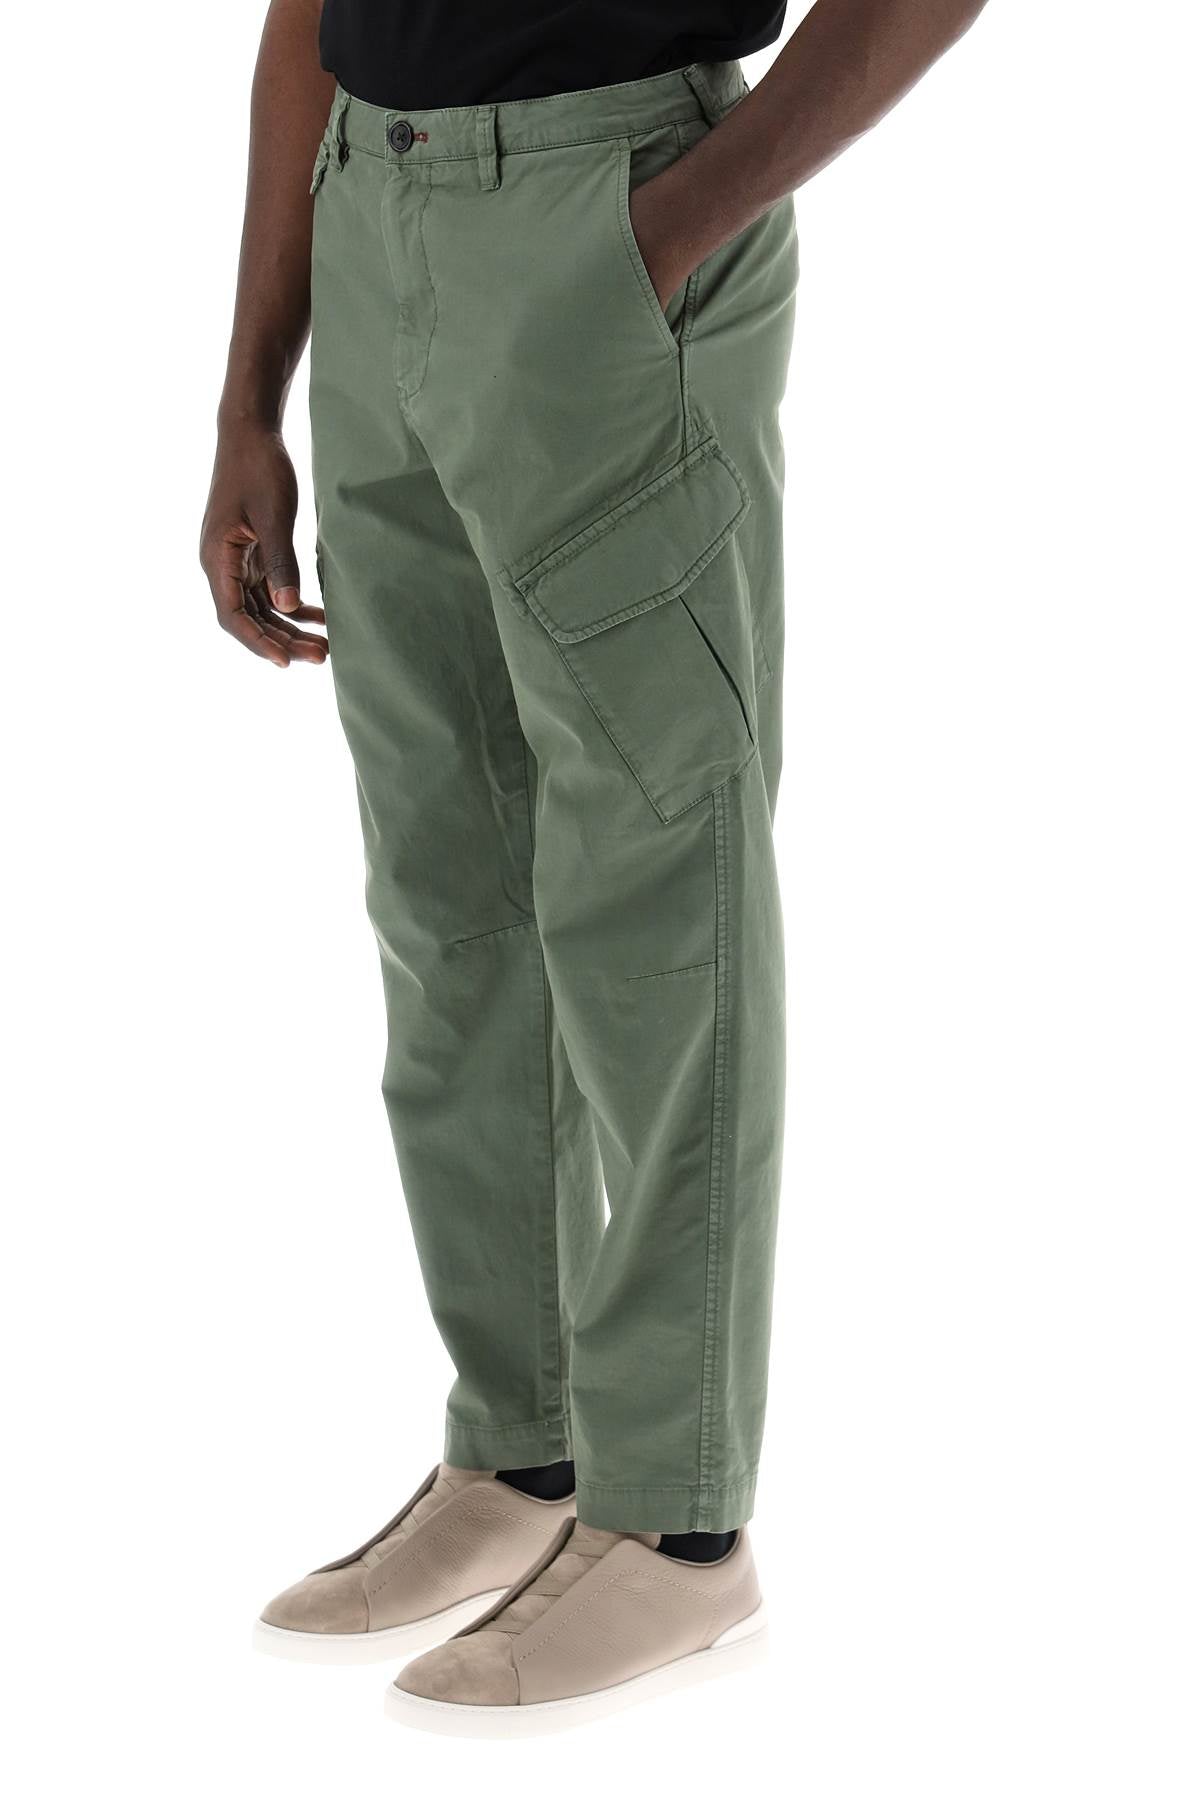 Ps paul smith stretch cotton cargo pants for men/w-3